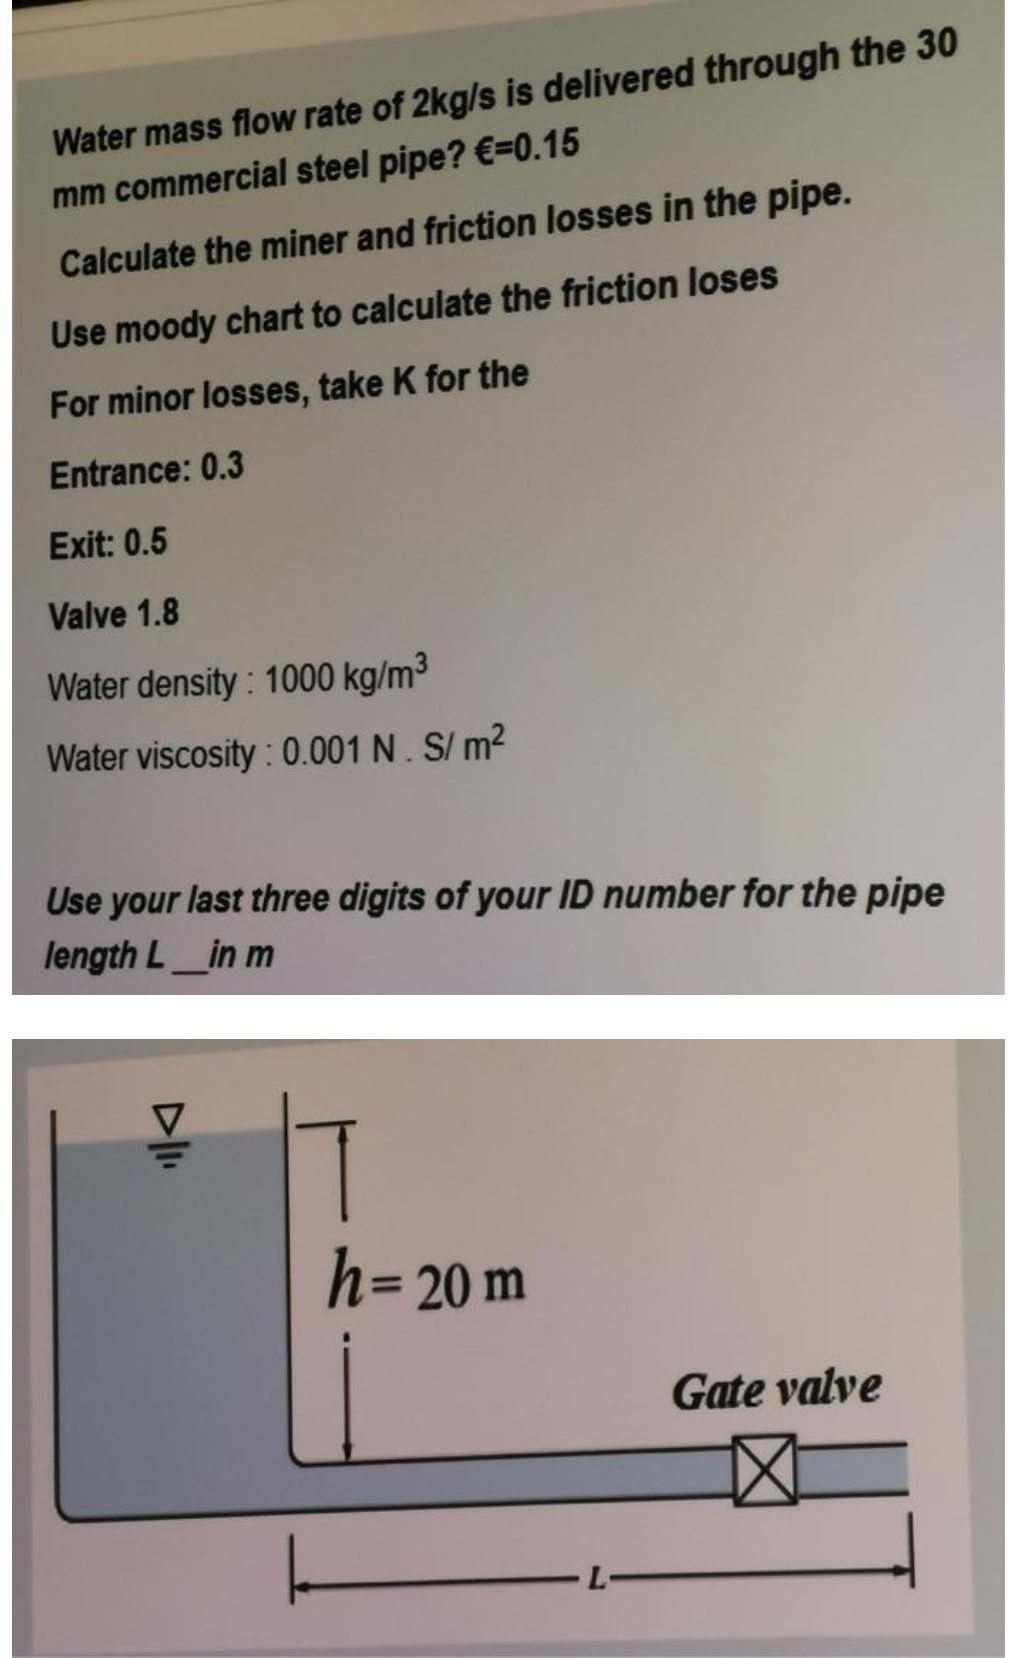 Water mass flow rate of 2kg/s is delivered through the 30
mm commercial steel pipe? €=0.15
Calculate the miner and friction losses in the pipe.
Use moody chart to calculate the friction loses
For minor losses, take K for the
Entrance: 0.3
Exit: 0.5
Valve 1.8
Water density : 1000 kg/m³
Water viscosity : 0.001 N . S/ m²
Use your last three digits of your ID number for the pipe
length L_in m
h=20 m
%3D
Gate valve
